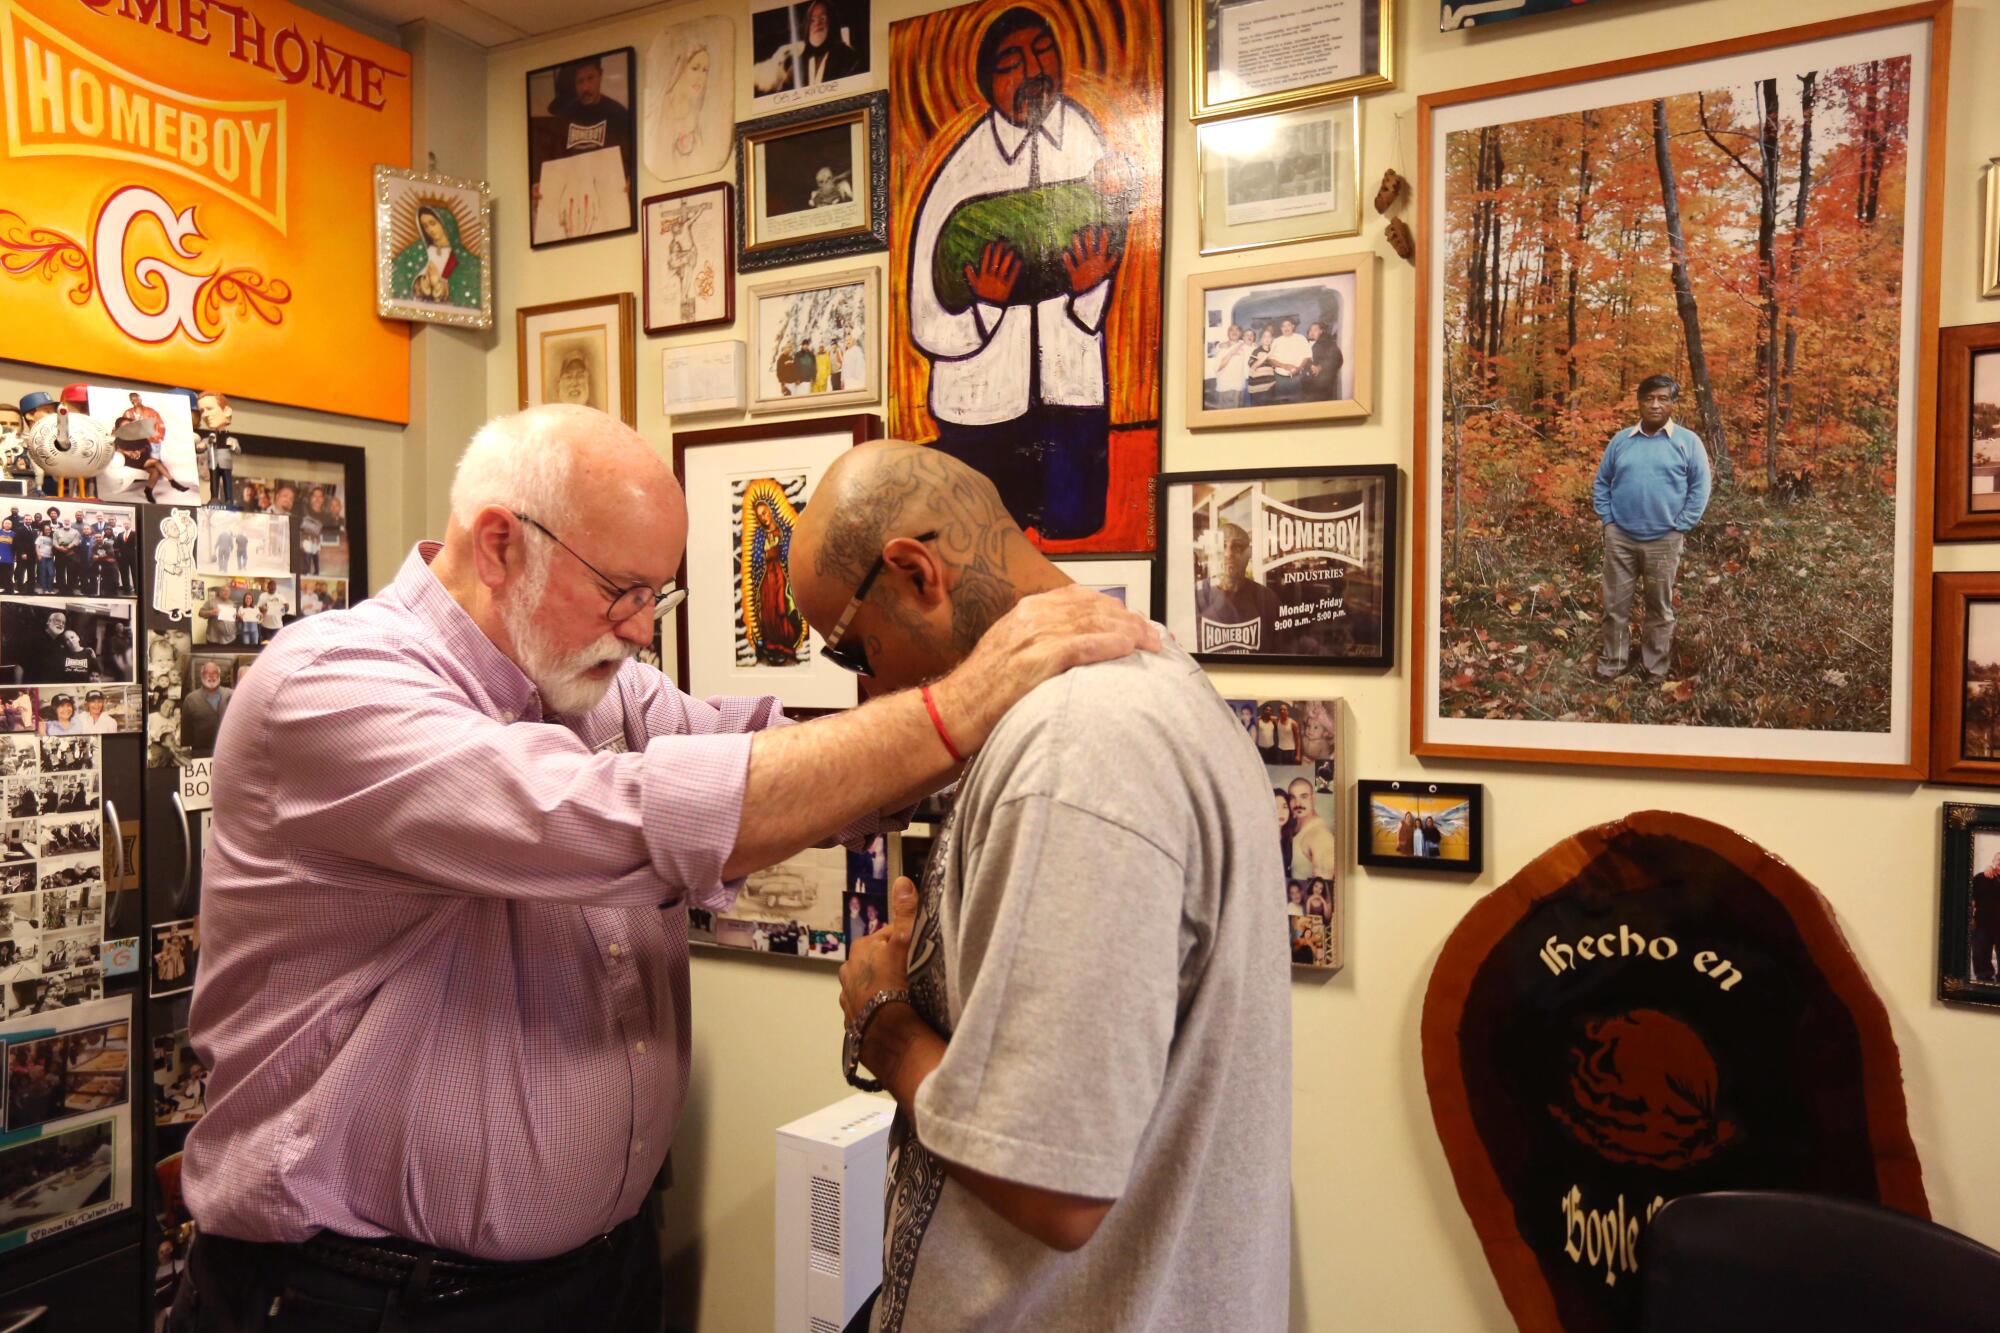 Robert Trejo, 32, right, receives a blessing from Father Gregory Boyle 